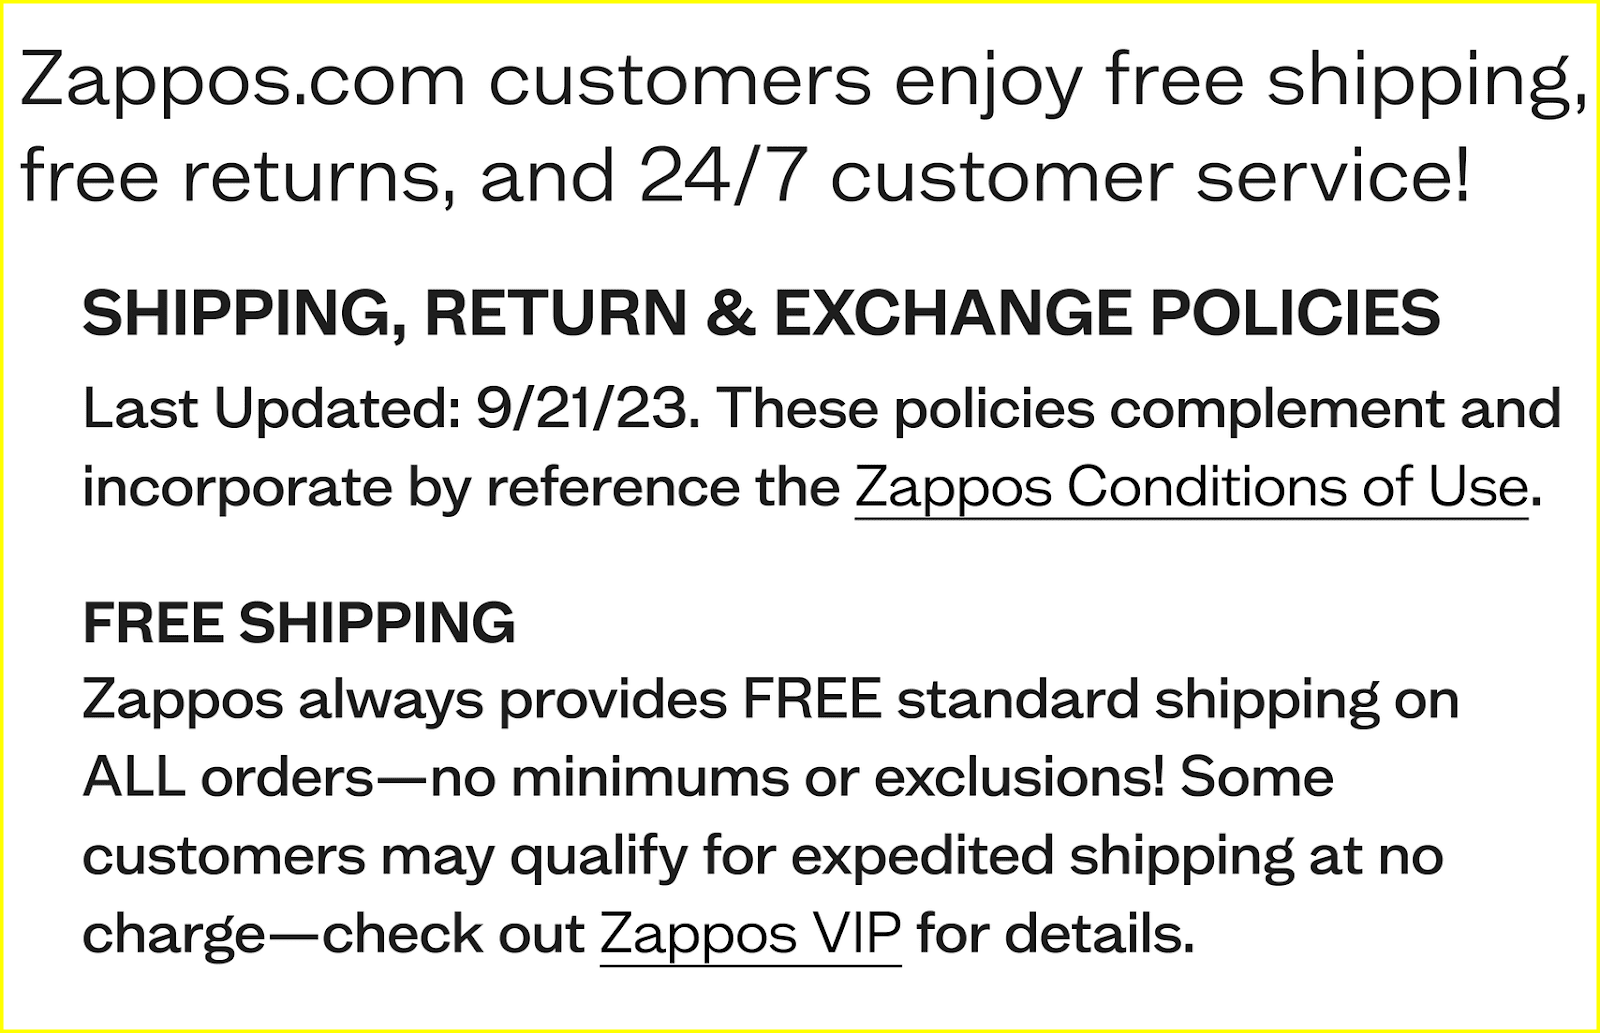 A section of Zappos’ shipping and return policies